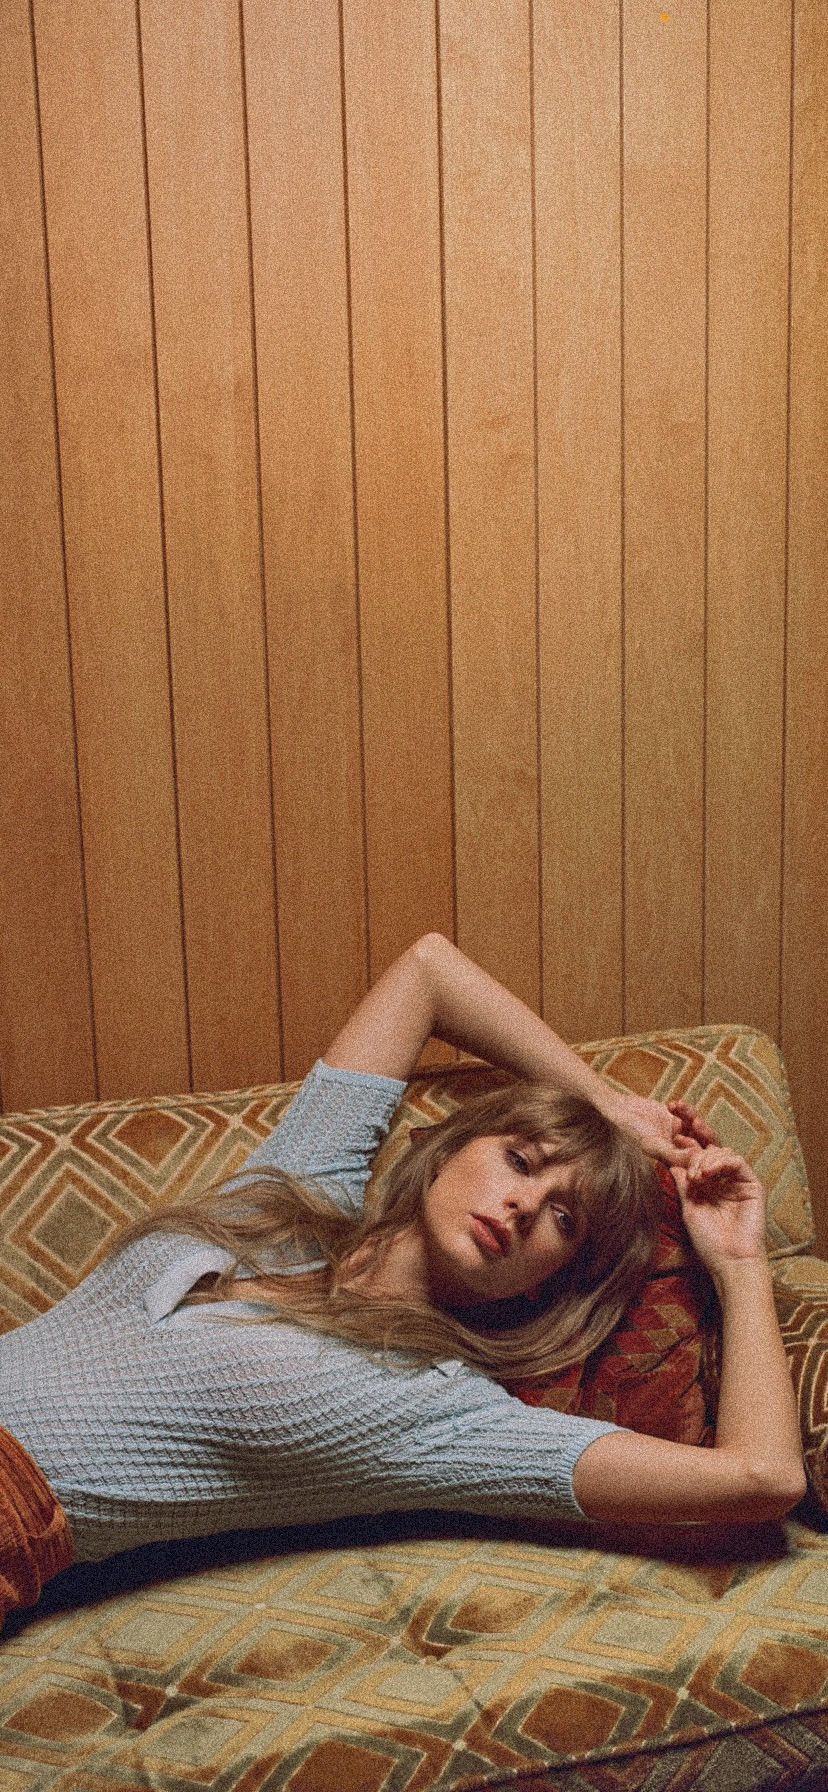 Taylor Swift laying on a couch - Taylor Swift